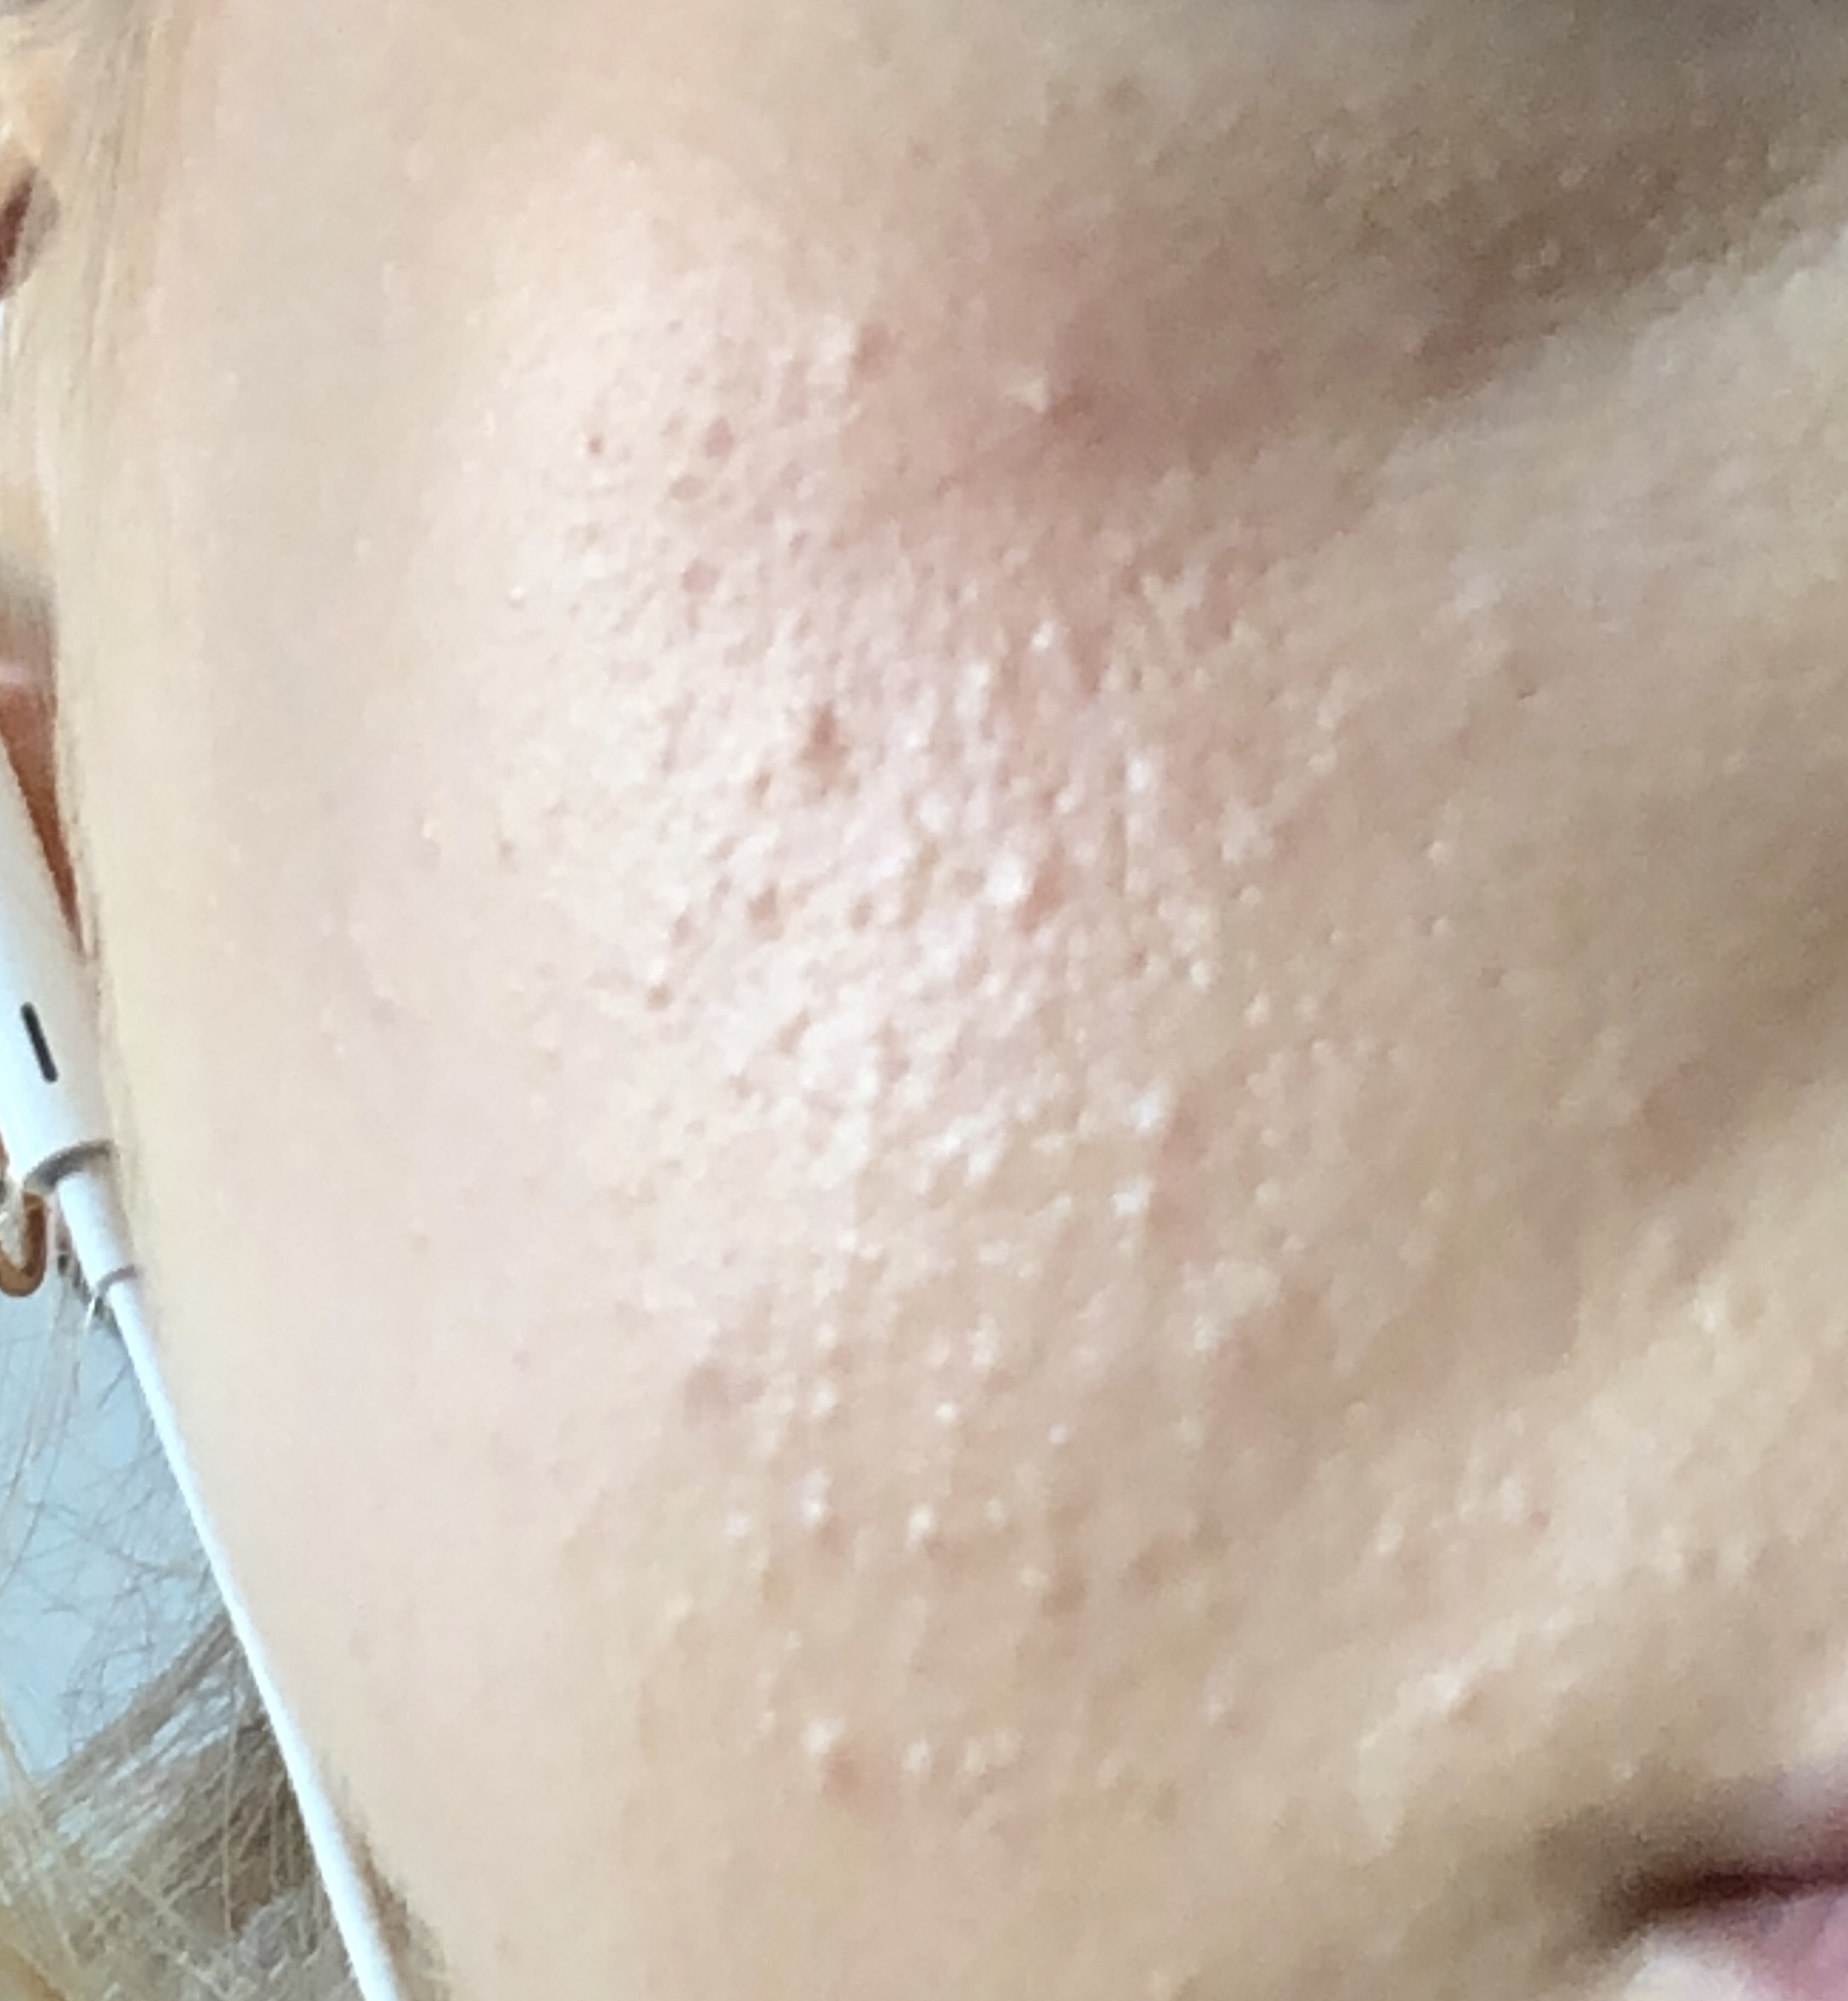 Thousands Of Bumps On My Face General Acne Discussion